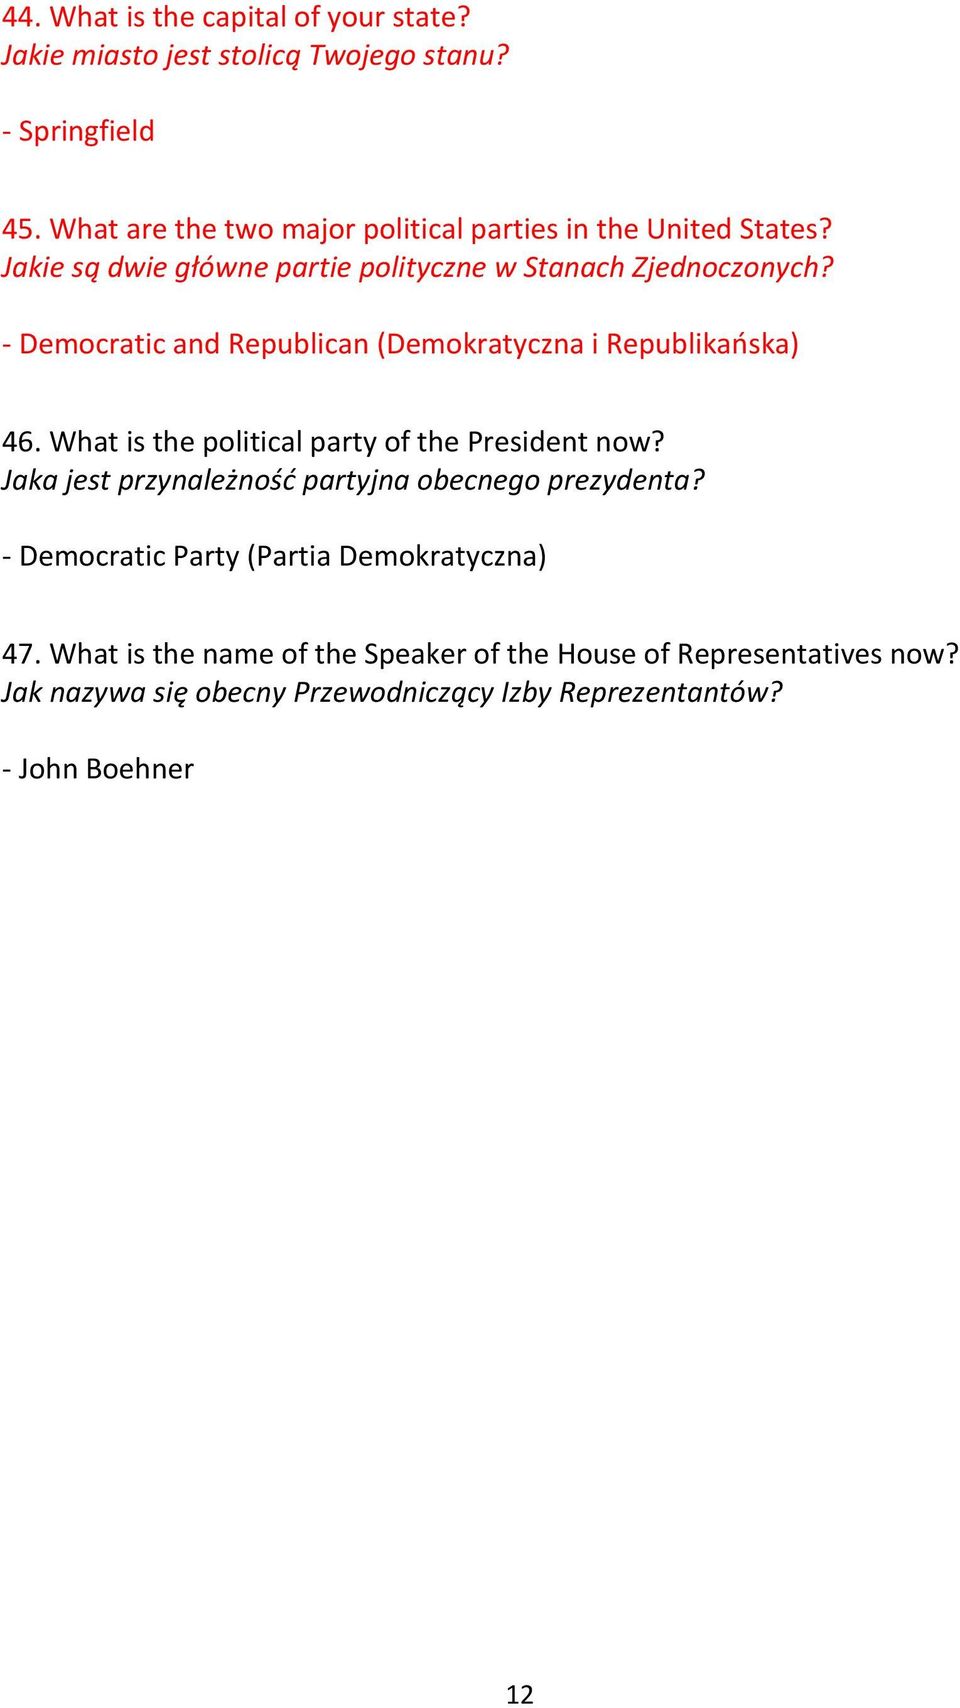 - Democratic and Republican (Demokratyczna i Republikańska) 46. What is the political party of the President now?